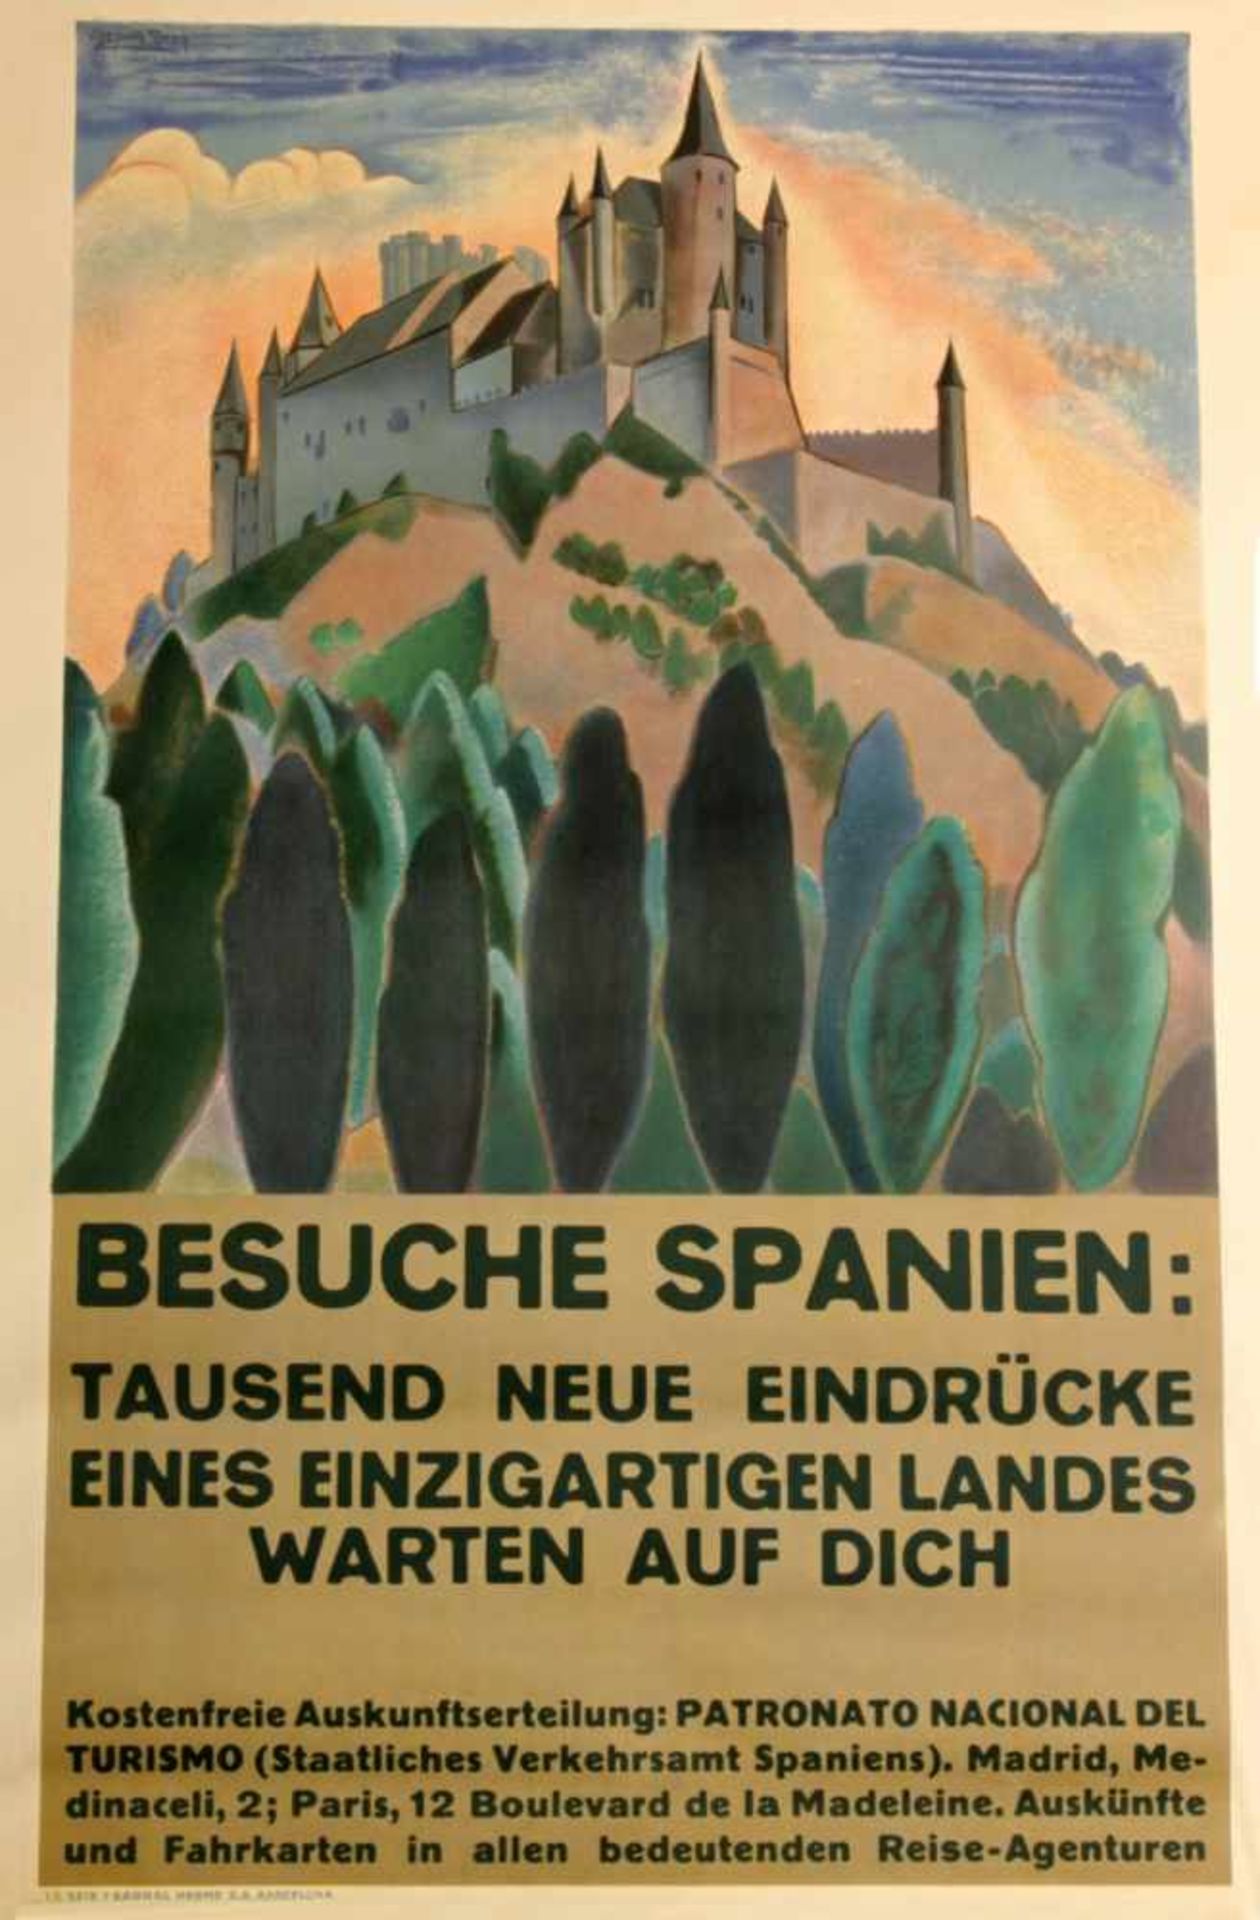 Poster Besuche Spanien Color poster, 20th to 40th years of the 20th century, Daniel VAZQUEZ DIAZ (